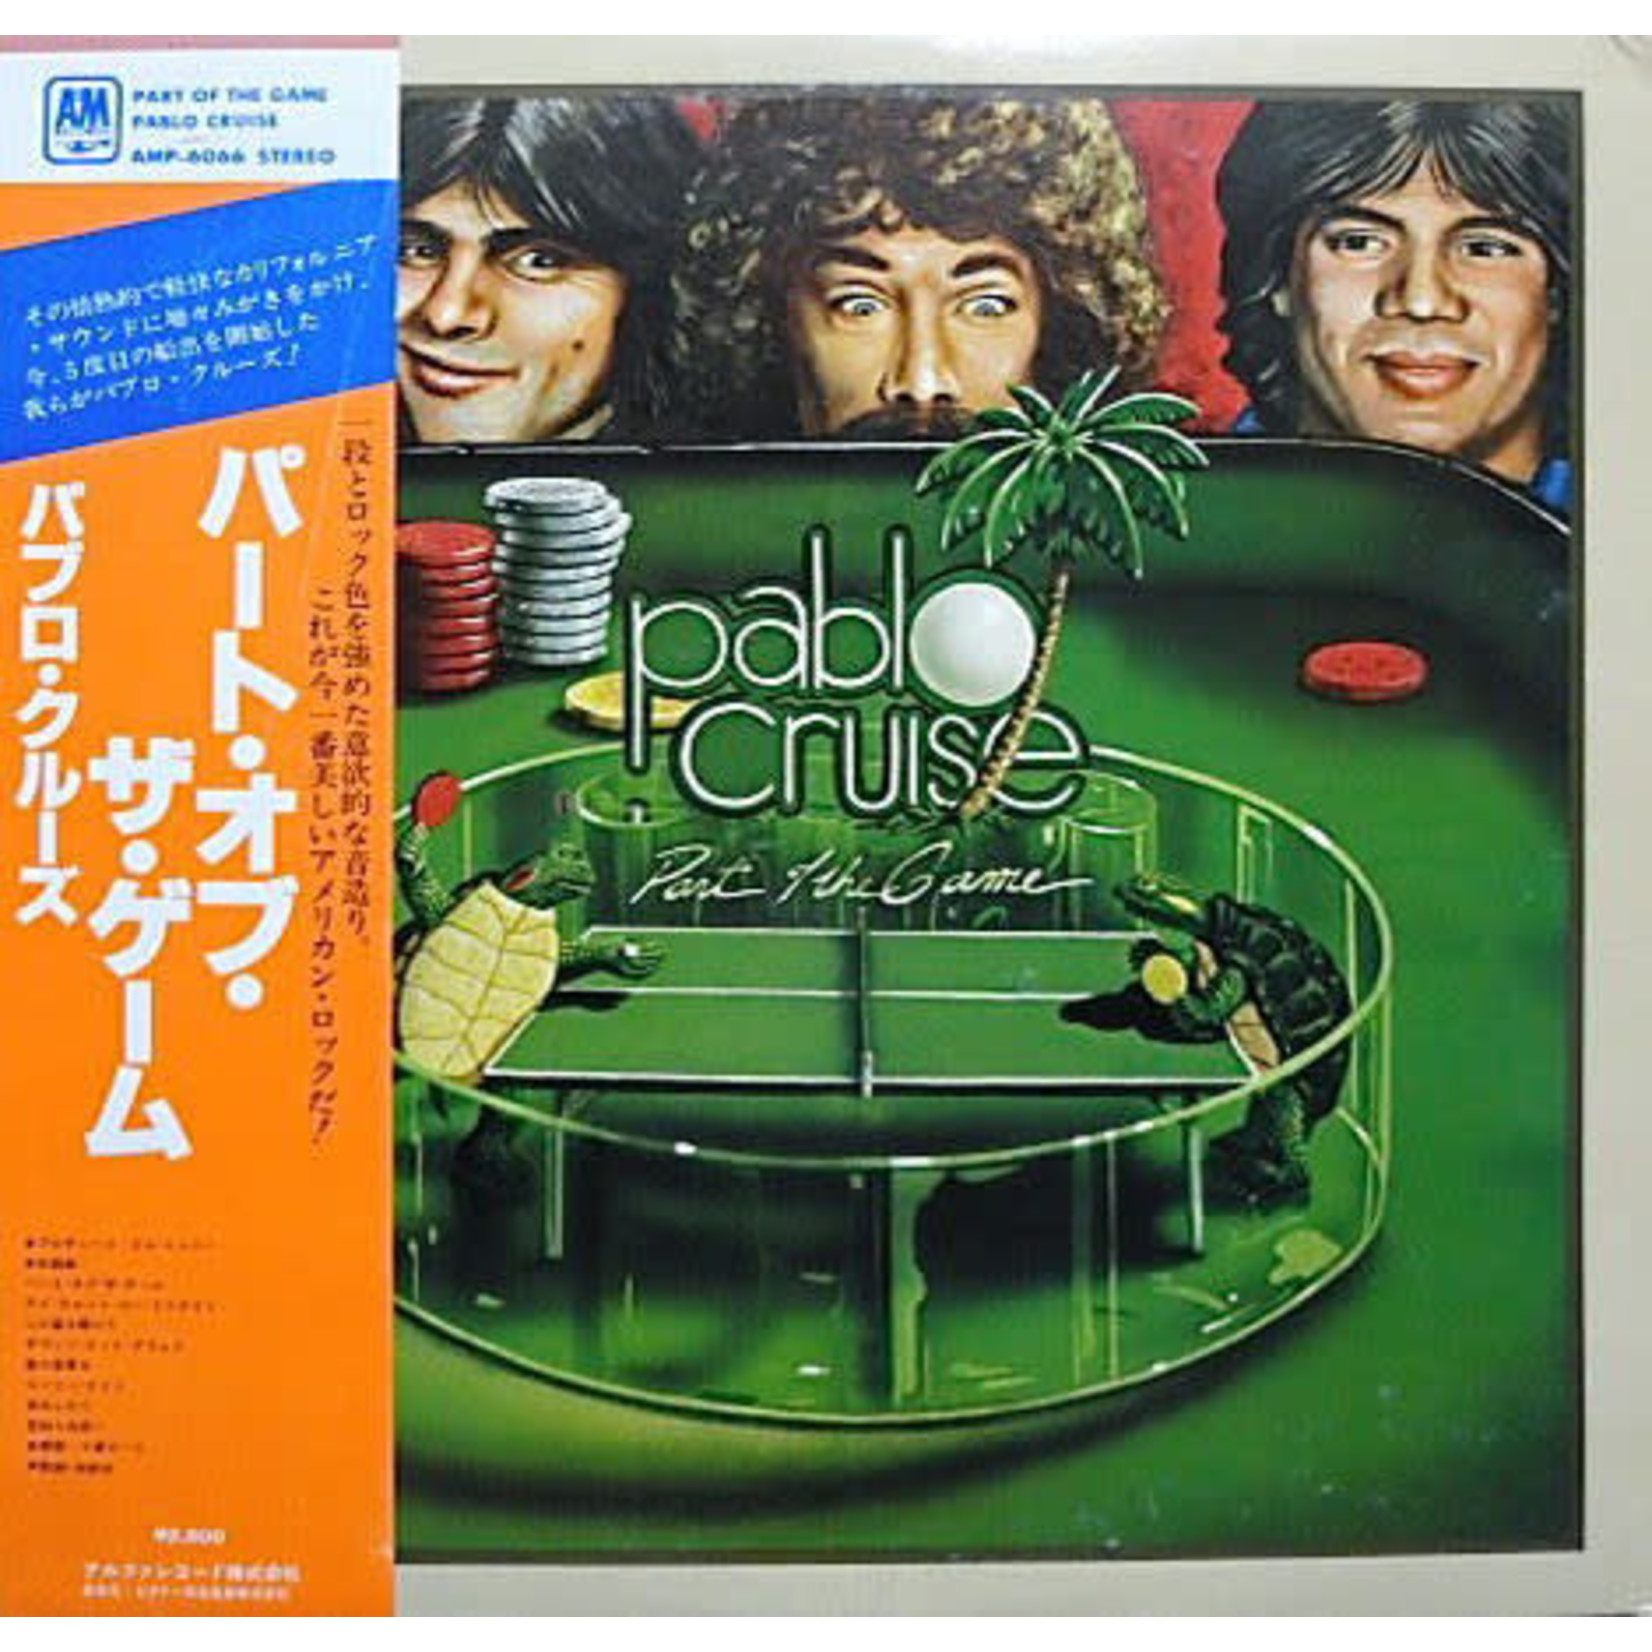 Pablo Cruise: Part Of The Game [JAPANESE VINTAGE]